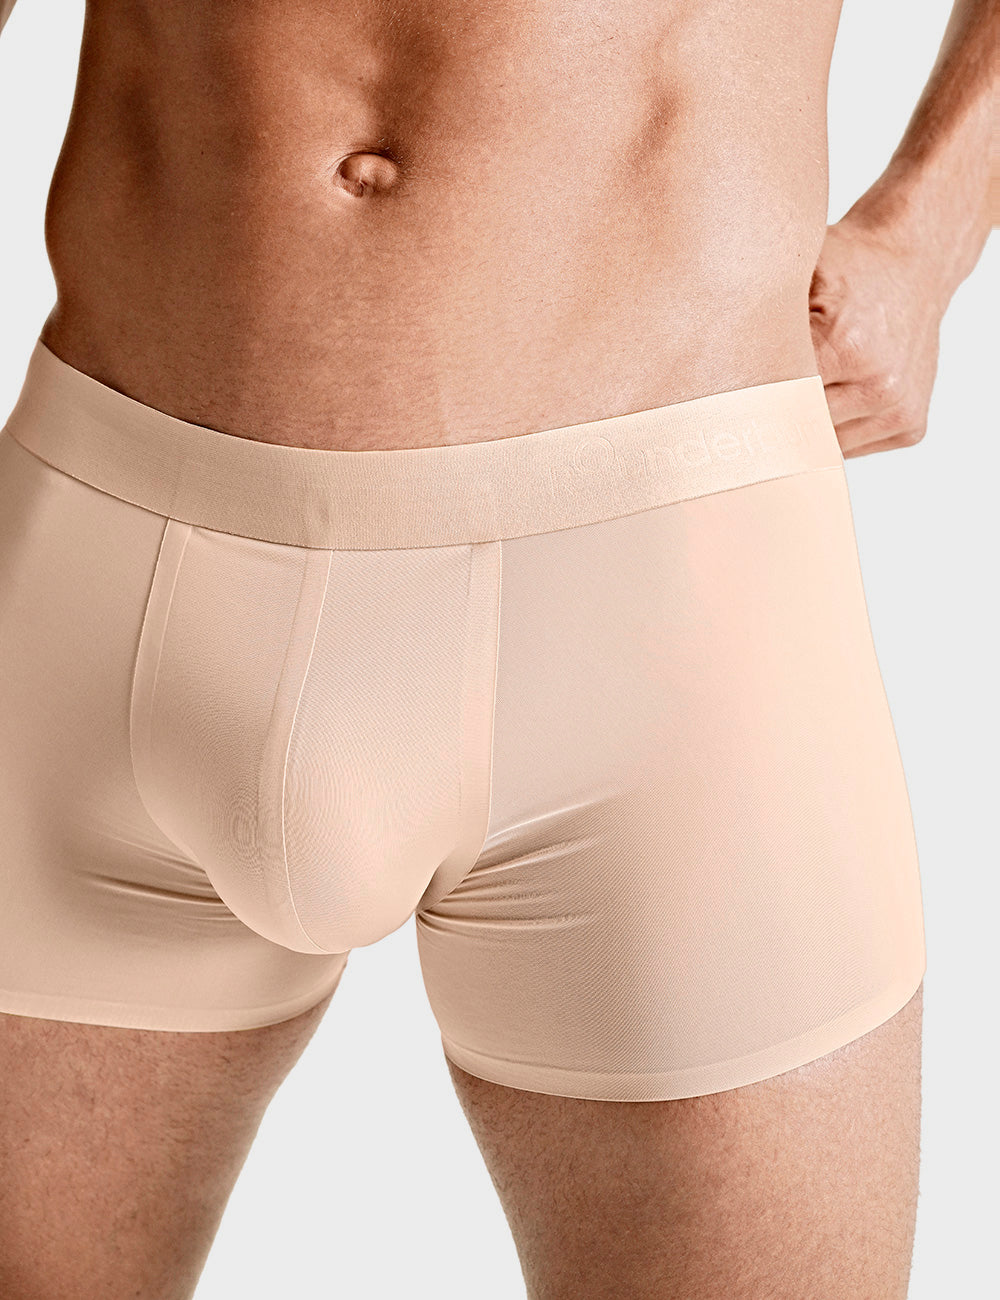 STEALTH Padded Boxer Trunk